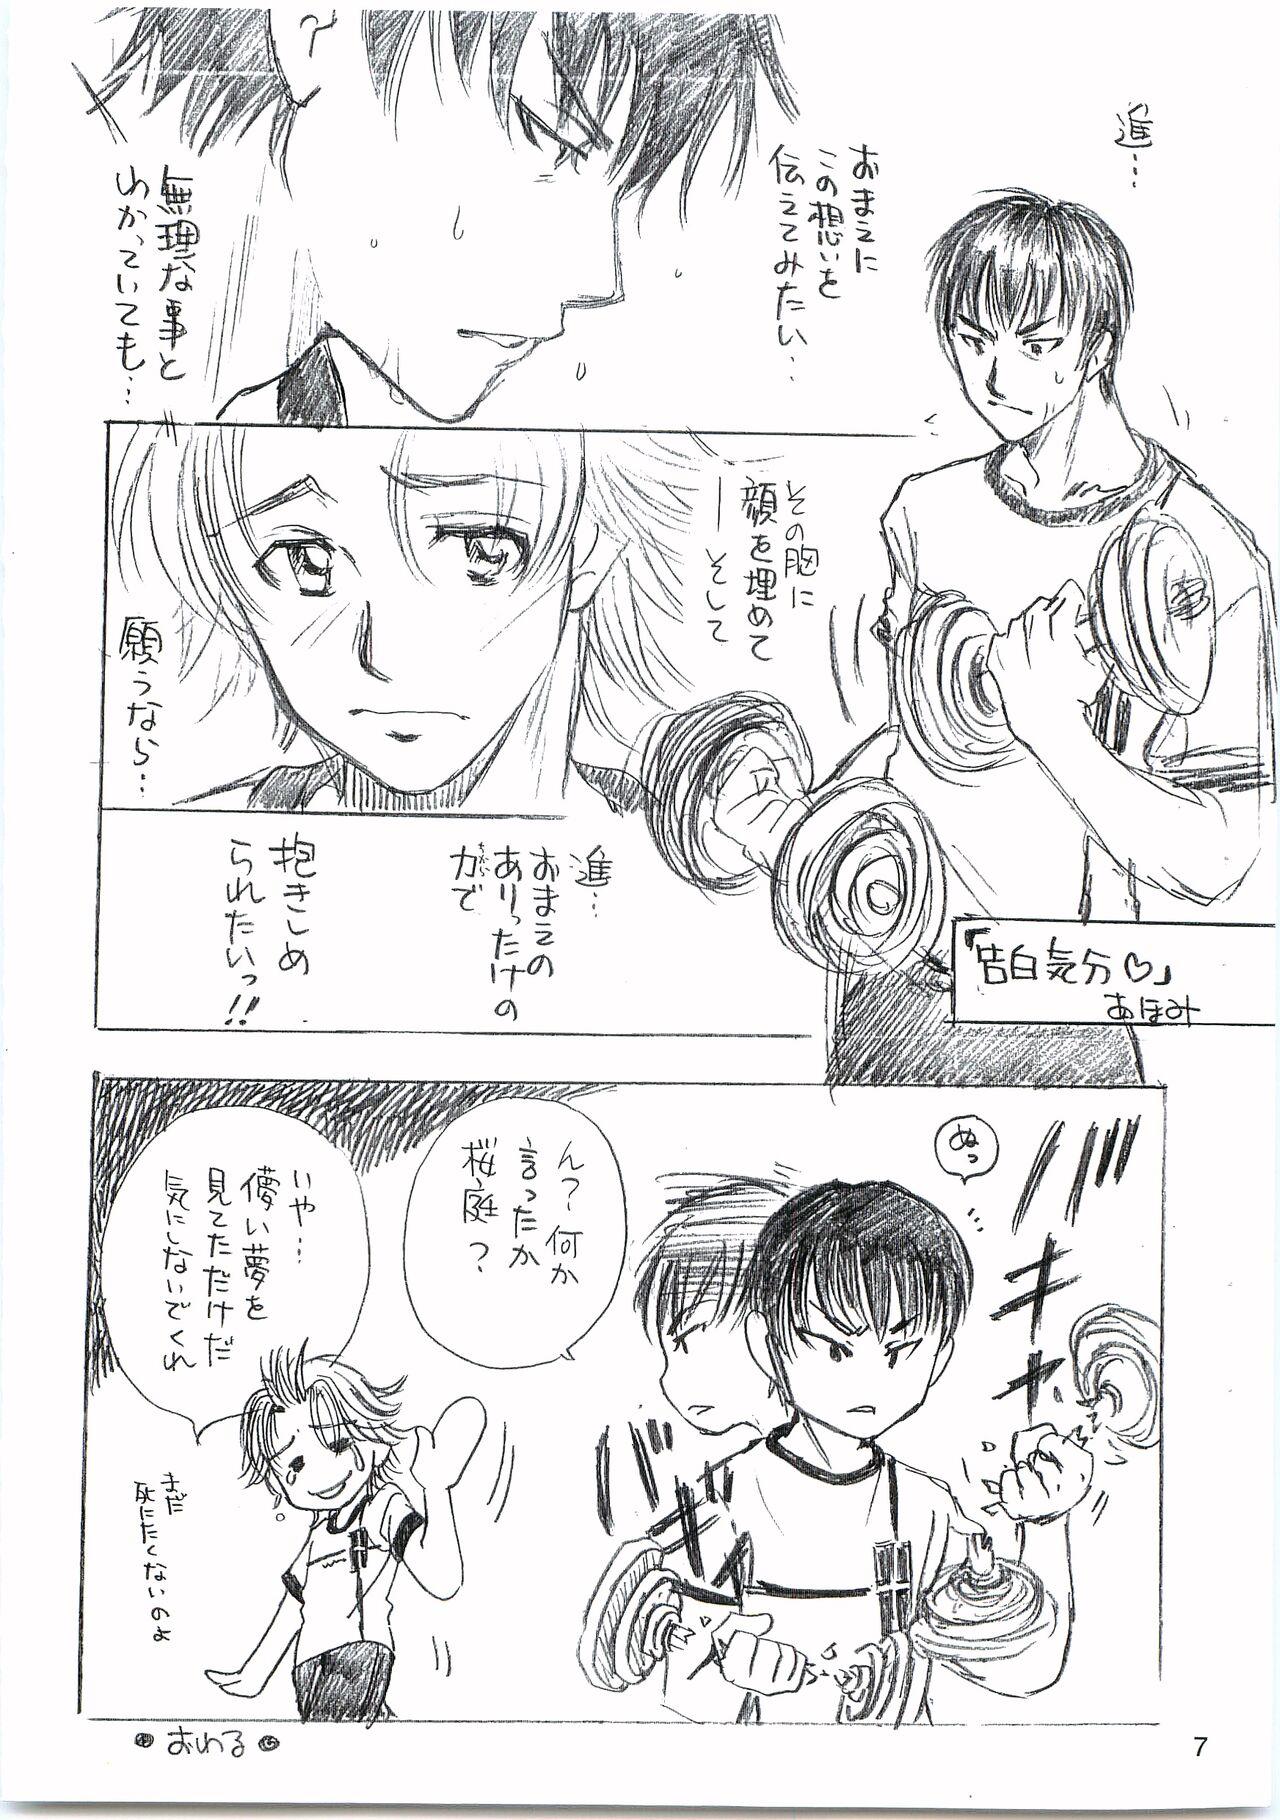 Cougars devil mania - Eyeshield 21 Twink - Page 6